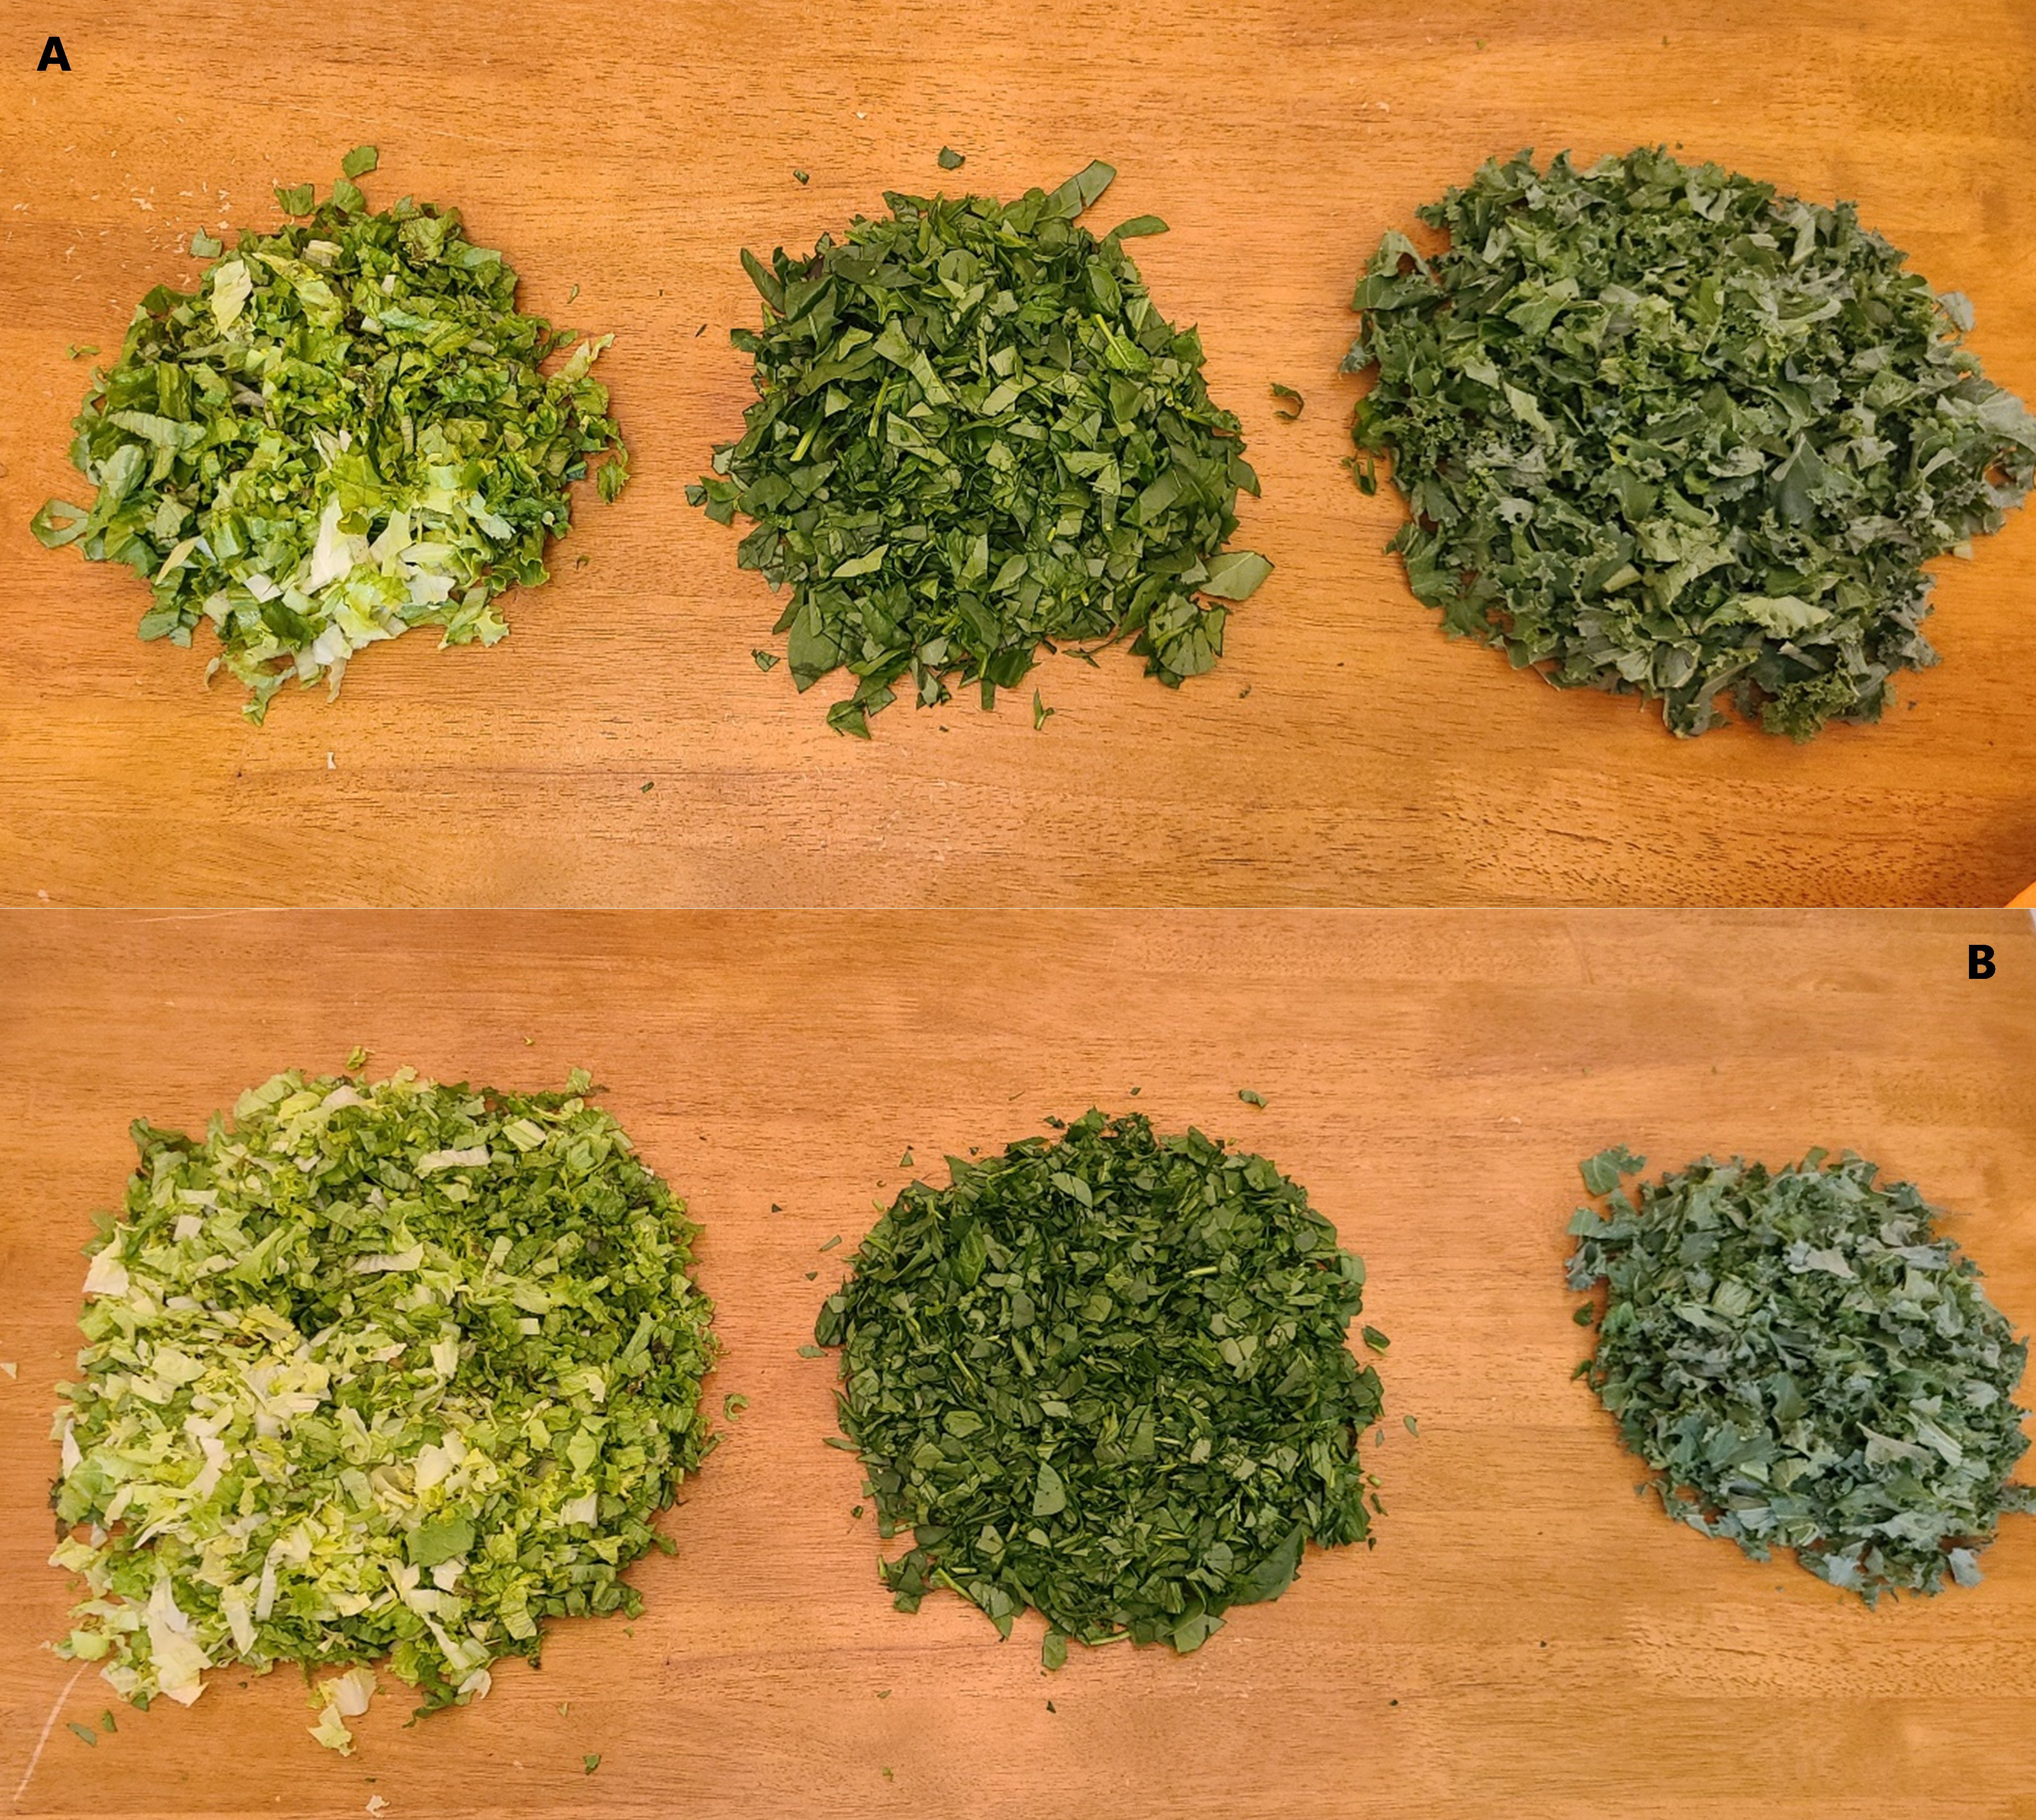 (A) 100 grams fresh weight of green leaf lettuce, spinach, and kale. (B) 300 grams fresh weight green leaf lettuce, 150 grams fresh weight spinach, and 100 grams fresh weight kale illustrating the relative proportion of leafy vegetable required to obtain the same dry weight. Dry weights for lettuce, spinach, and kale are based on 5%, 9%, and 15% dry weight/fresh weight ratio.